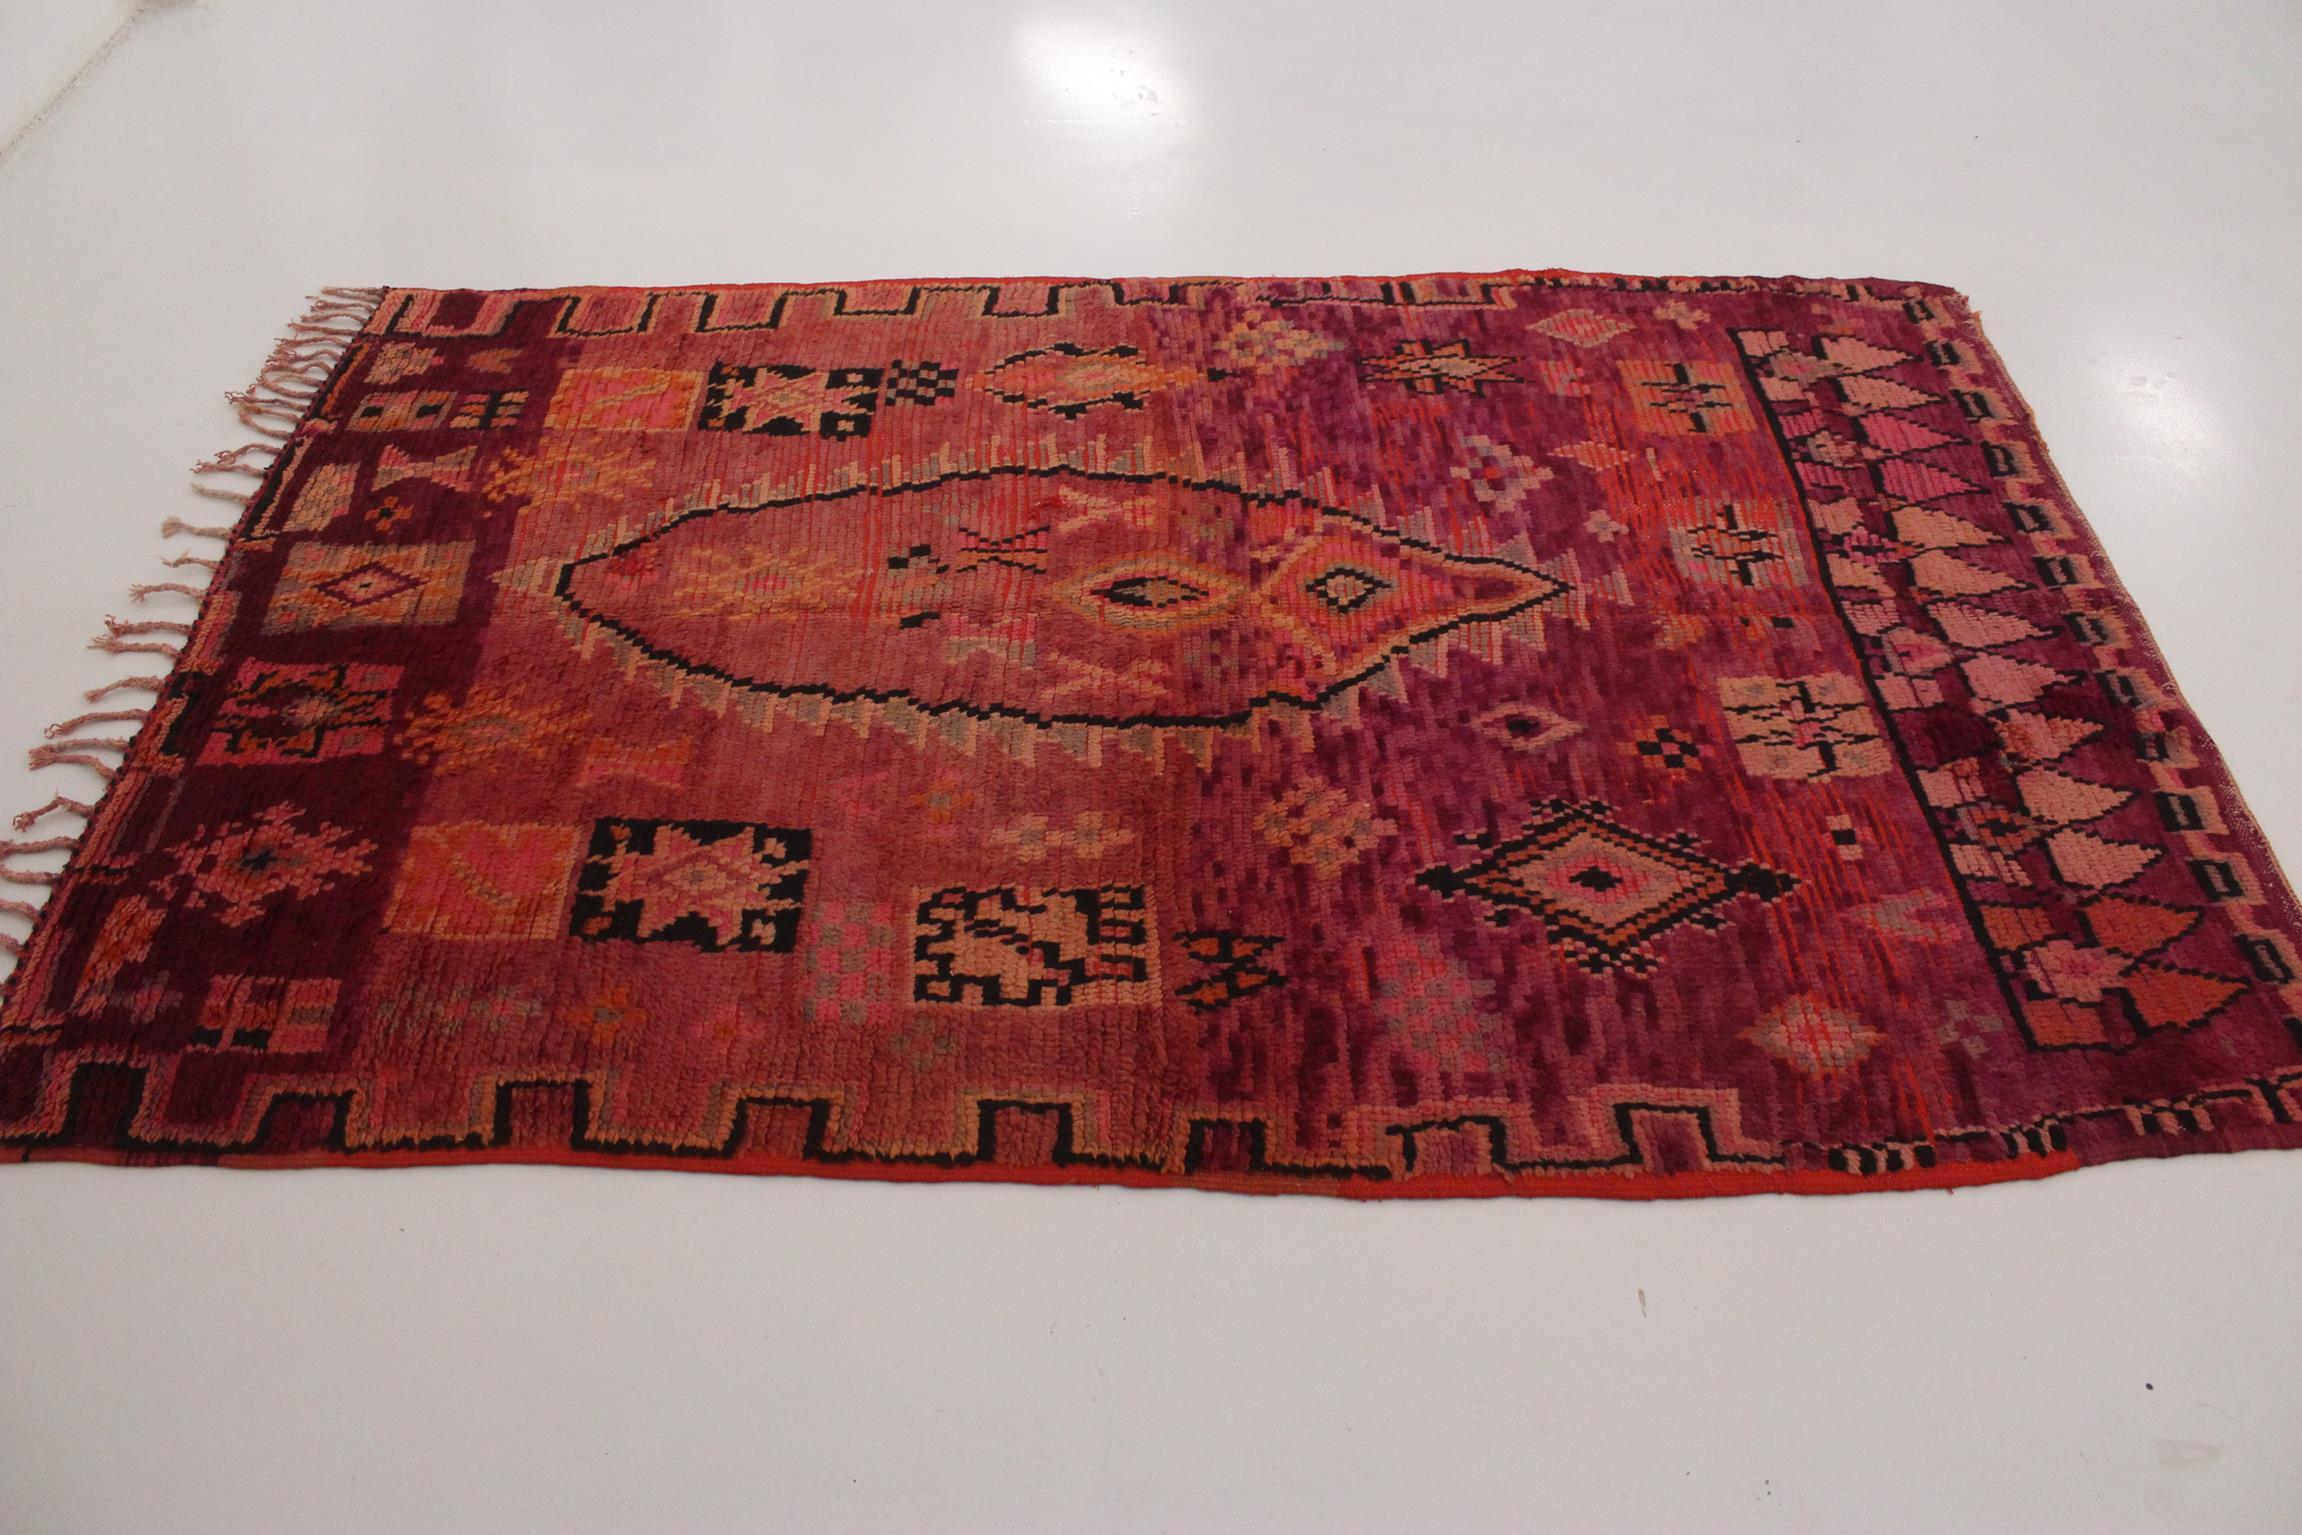 Hand-Woven Vintage Moroccan Boujad rug - Red/purple - 5.3x8.1feet / 162x247cm For Sale